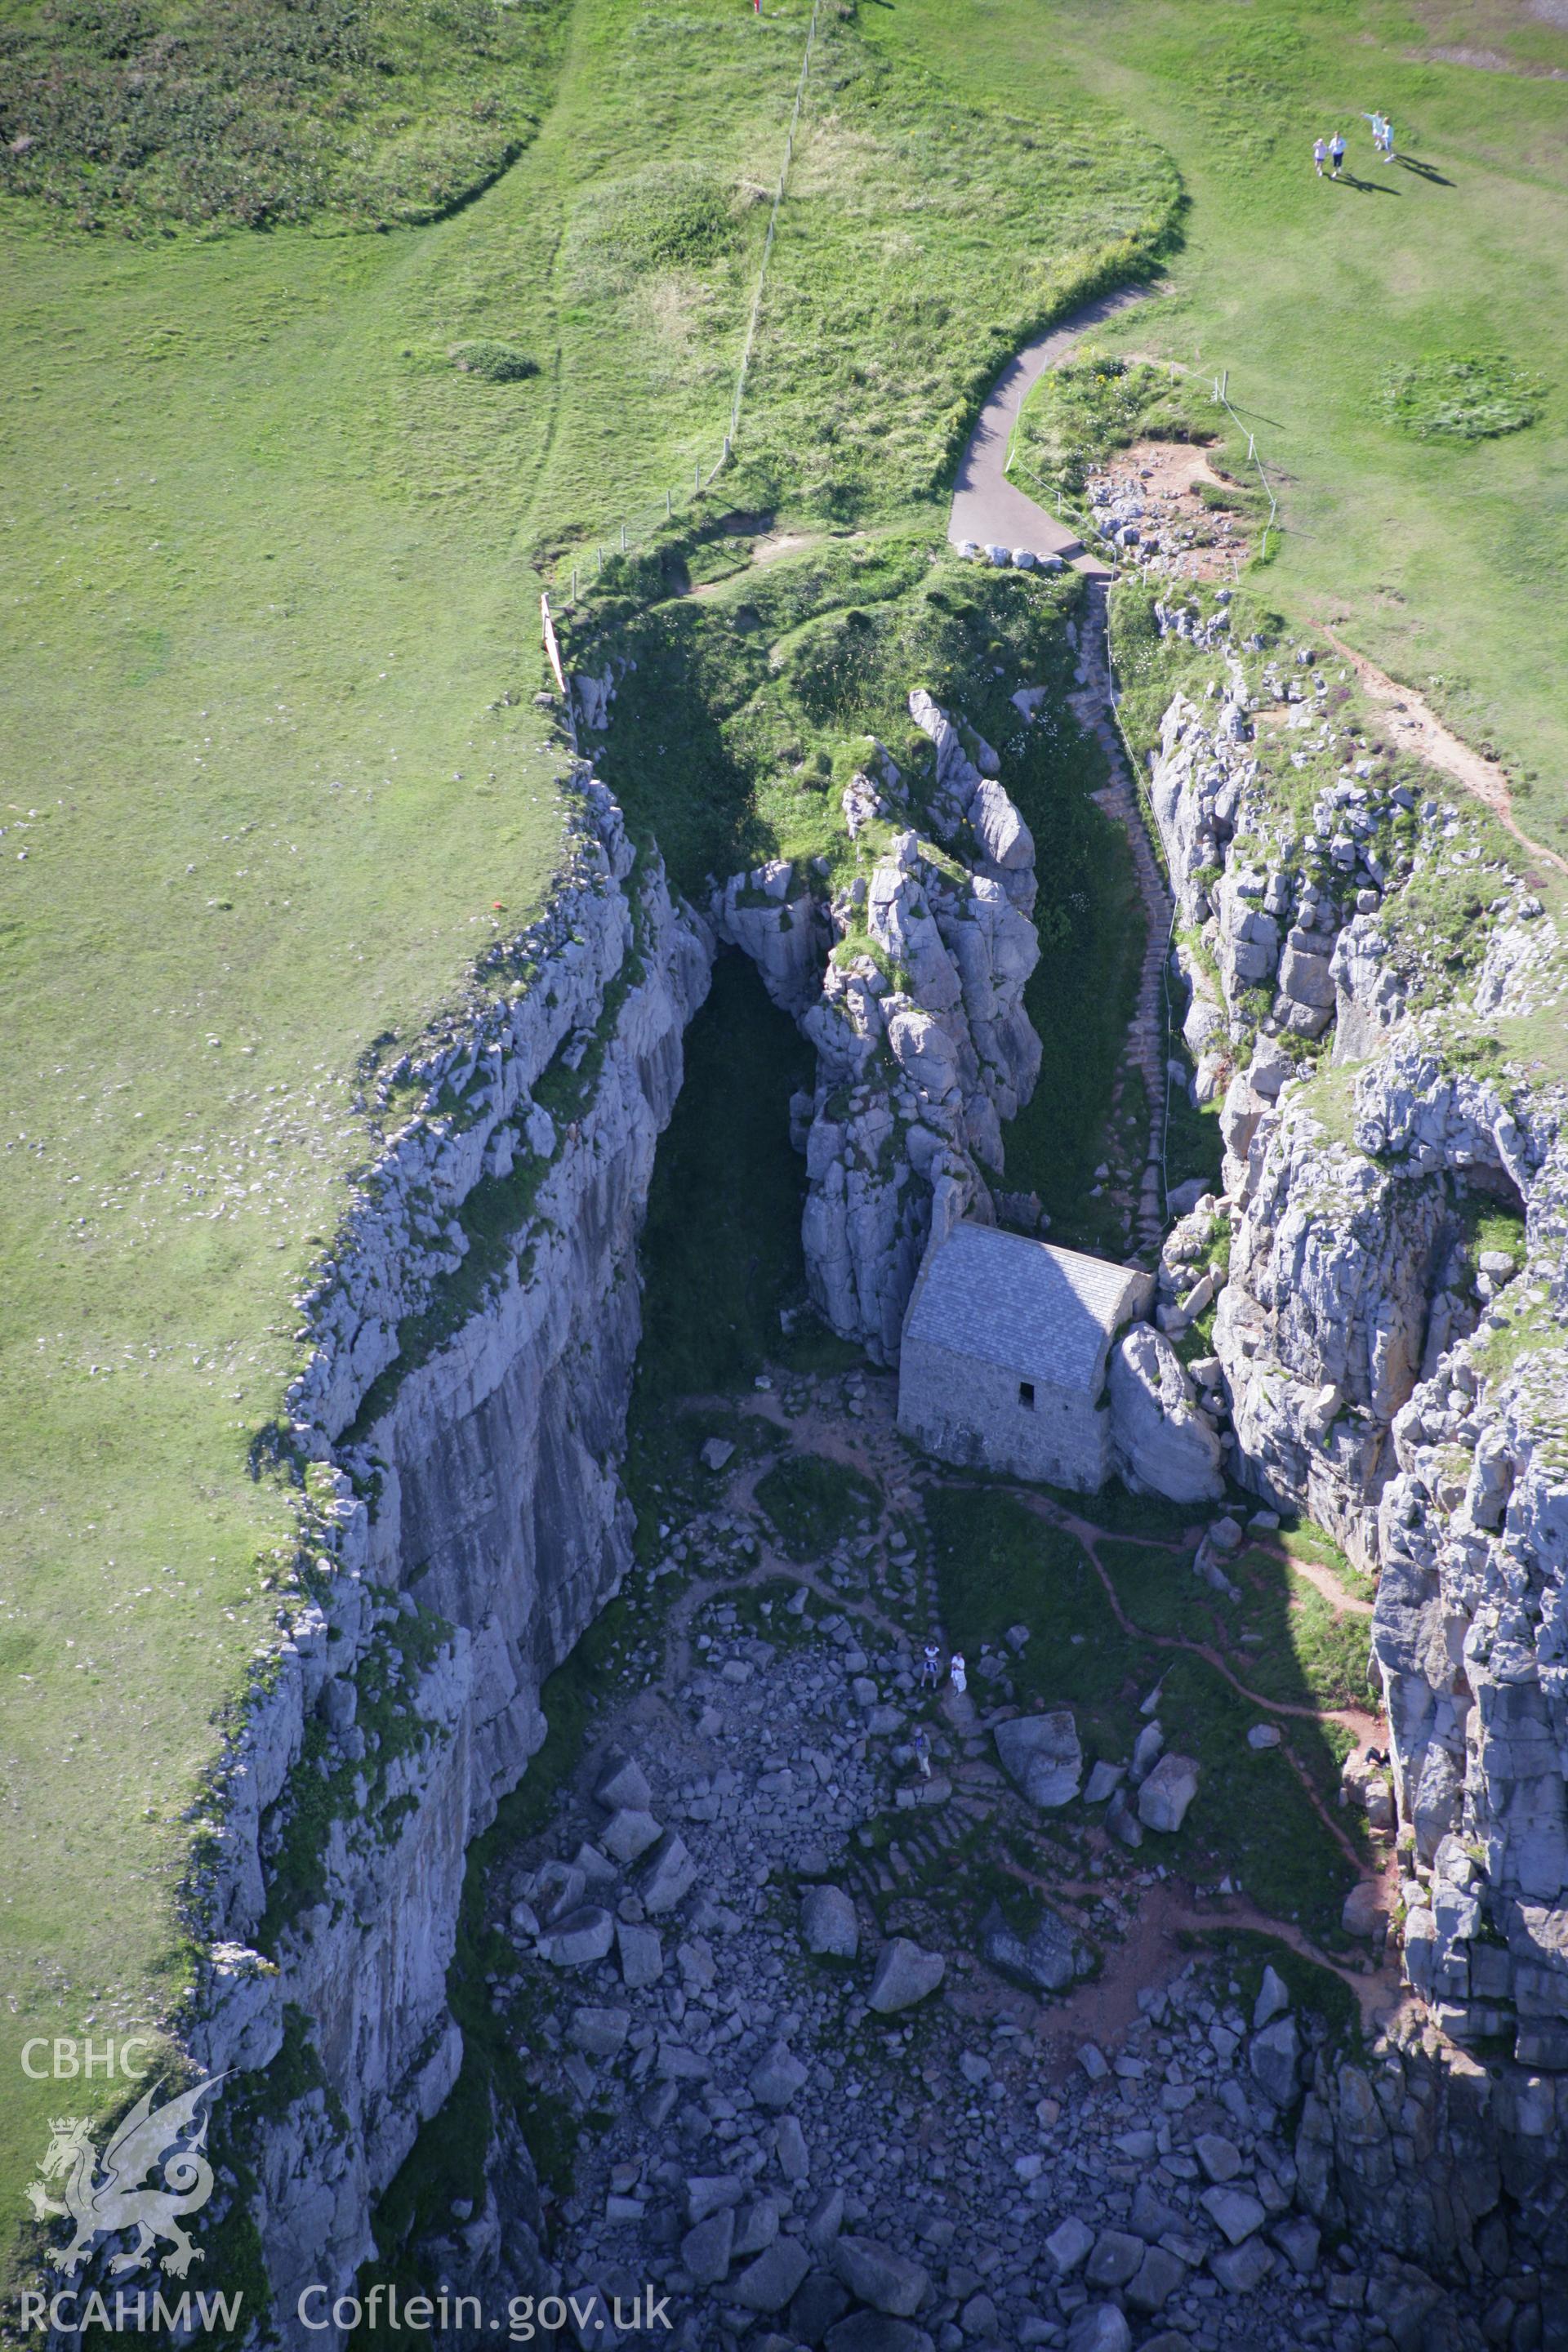 RCAHMW colour oblique aerial photograph of St Govan's Chapel. Taken on 30 July 2007 by Toby Driver